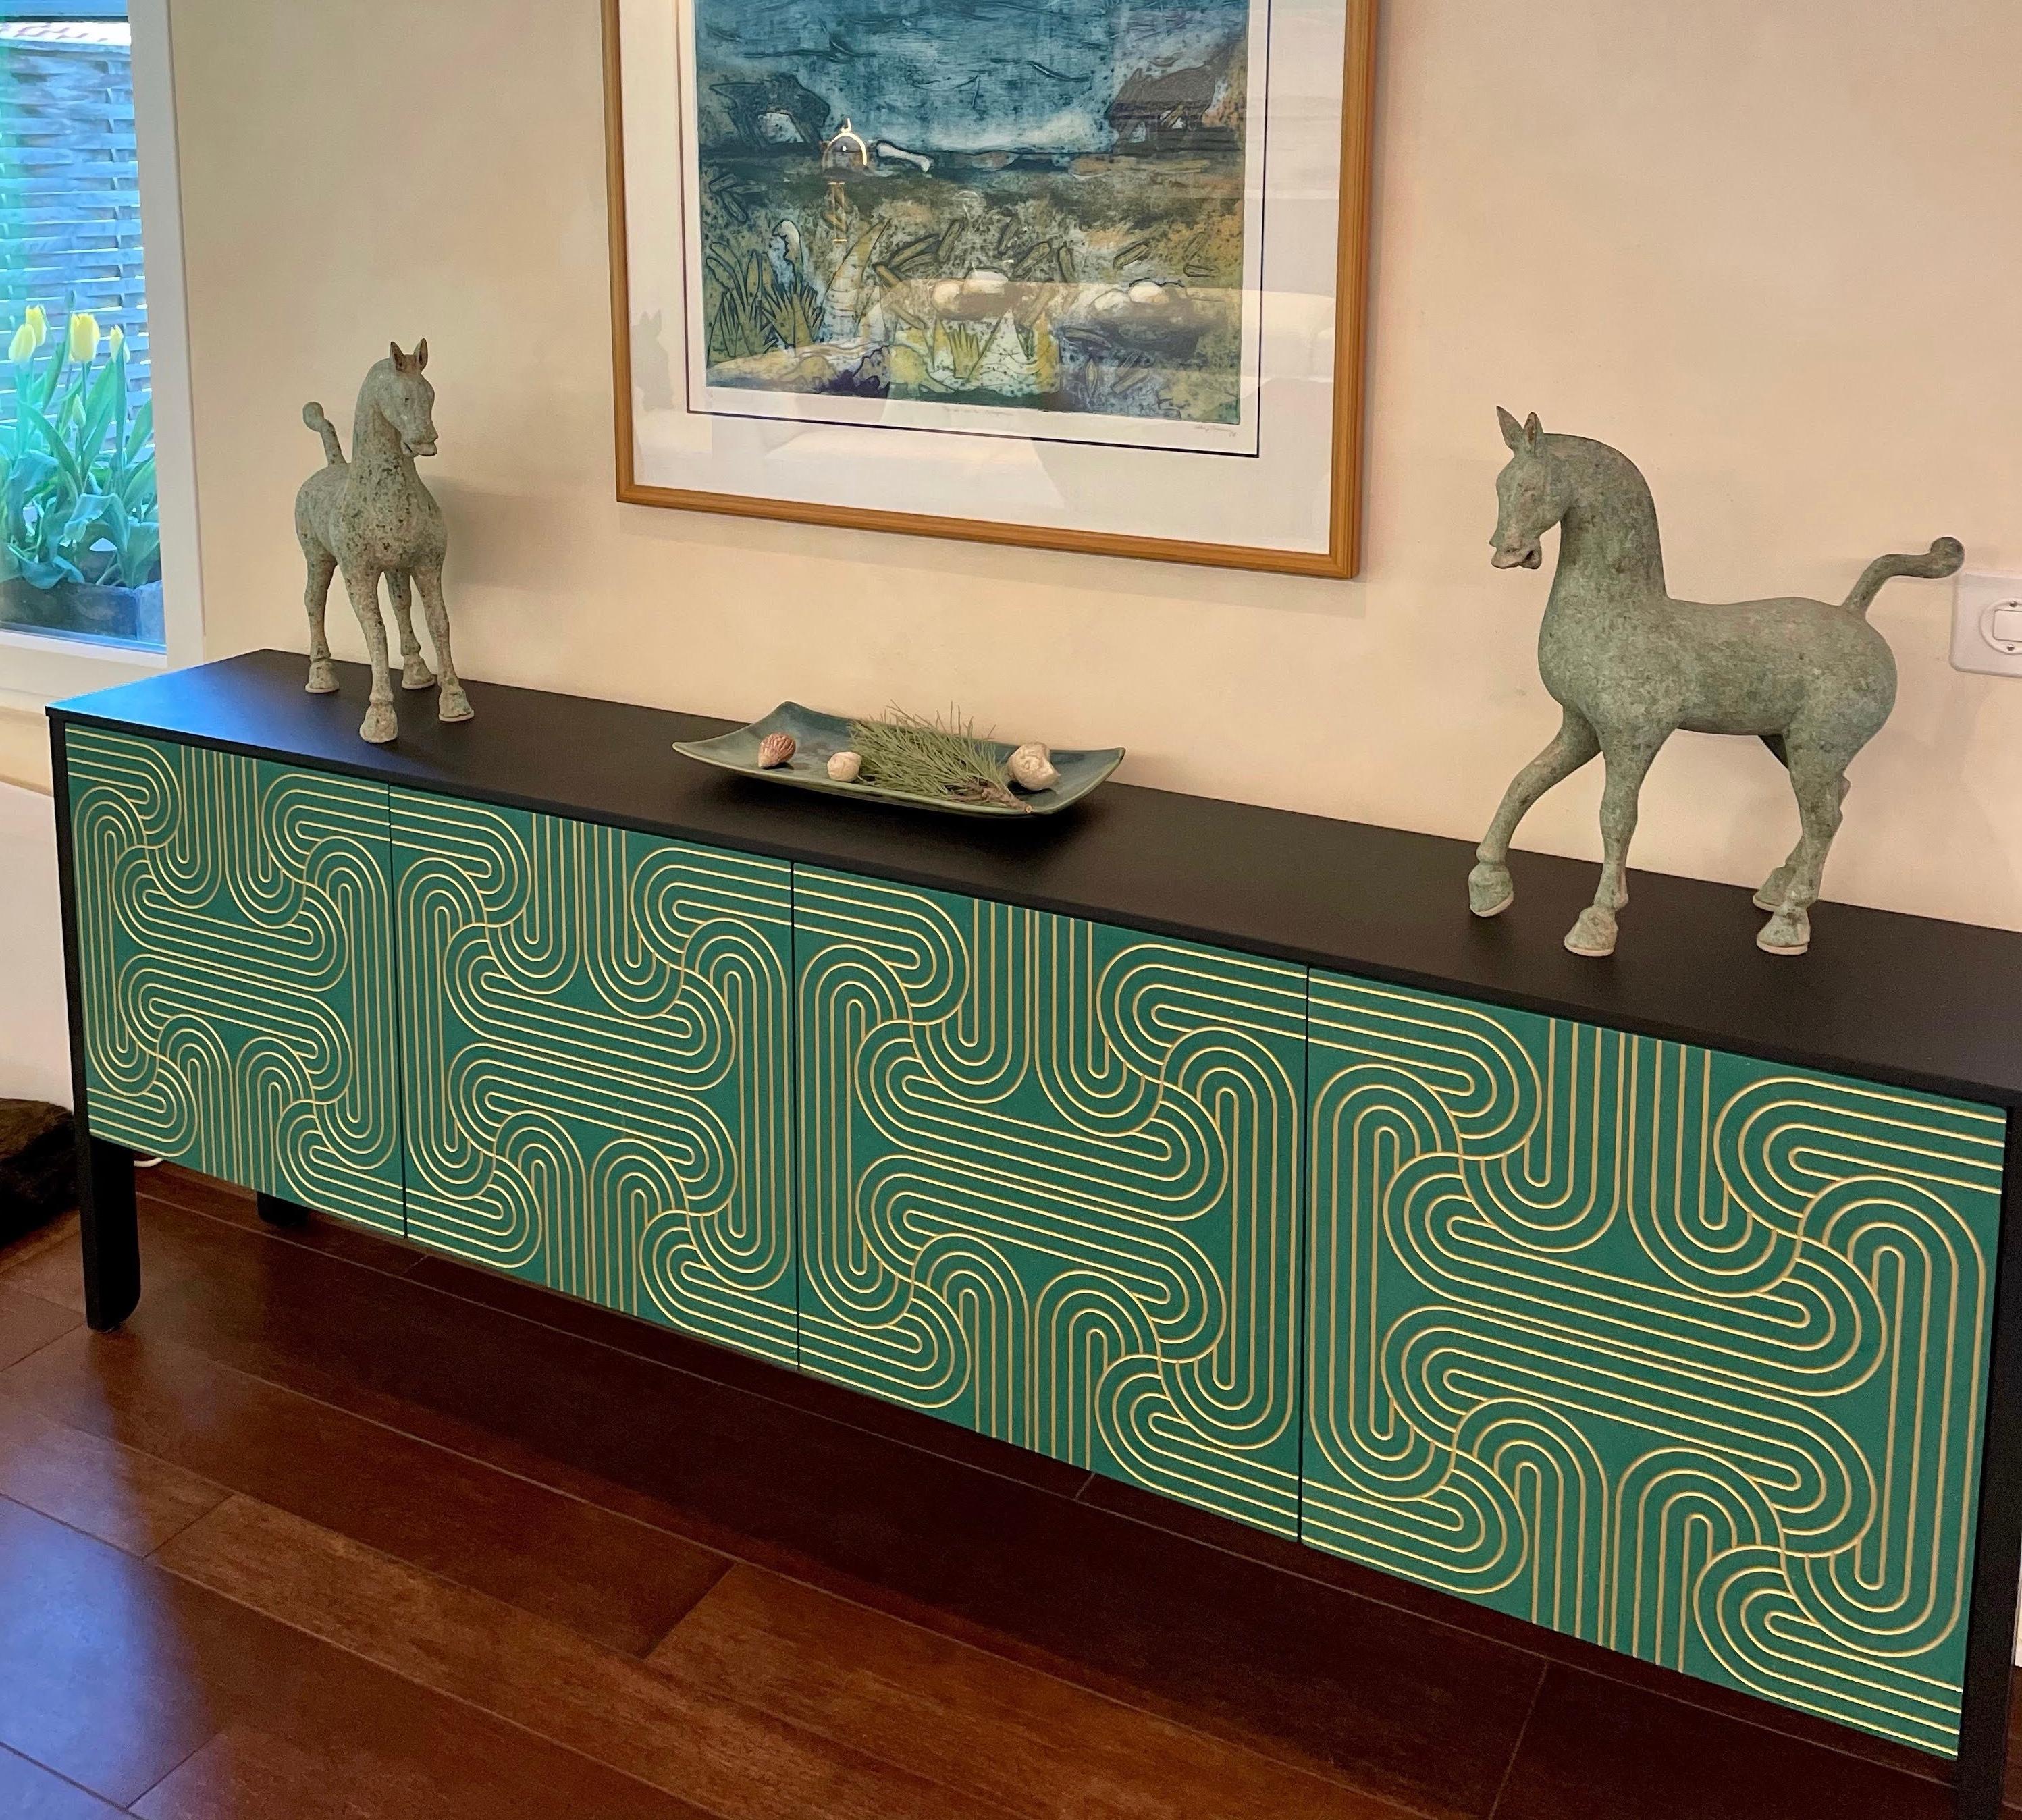 The stunning Loop Sideboards are available in a range of colours, verdant Green, bold Blue or striking Black.
The elegant Loop pattern is engraved onto the doors and handpainted in gold.
Each piece is finished by hand using a environmentally